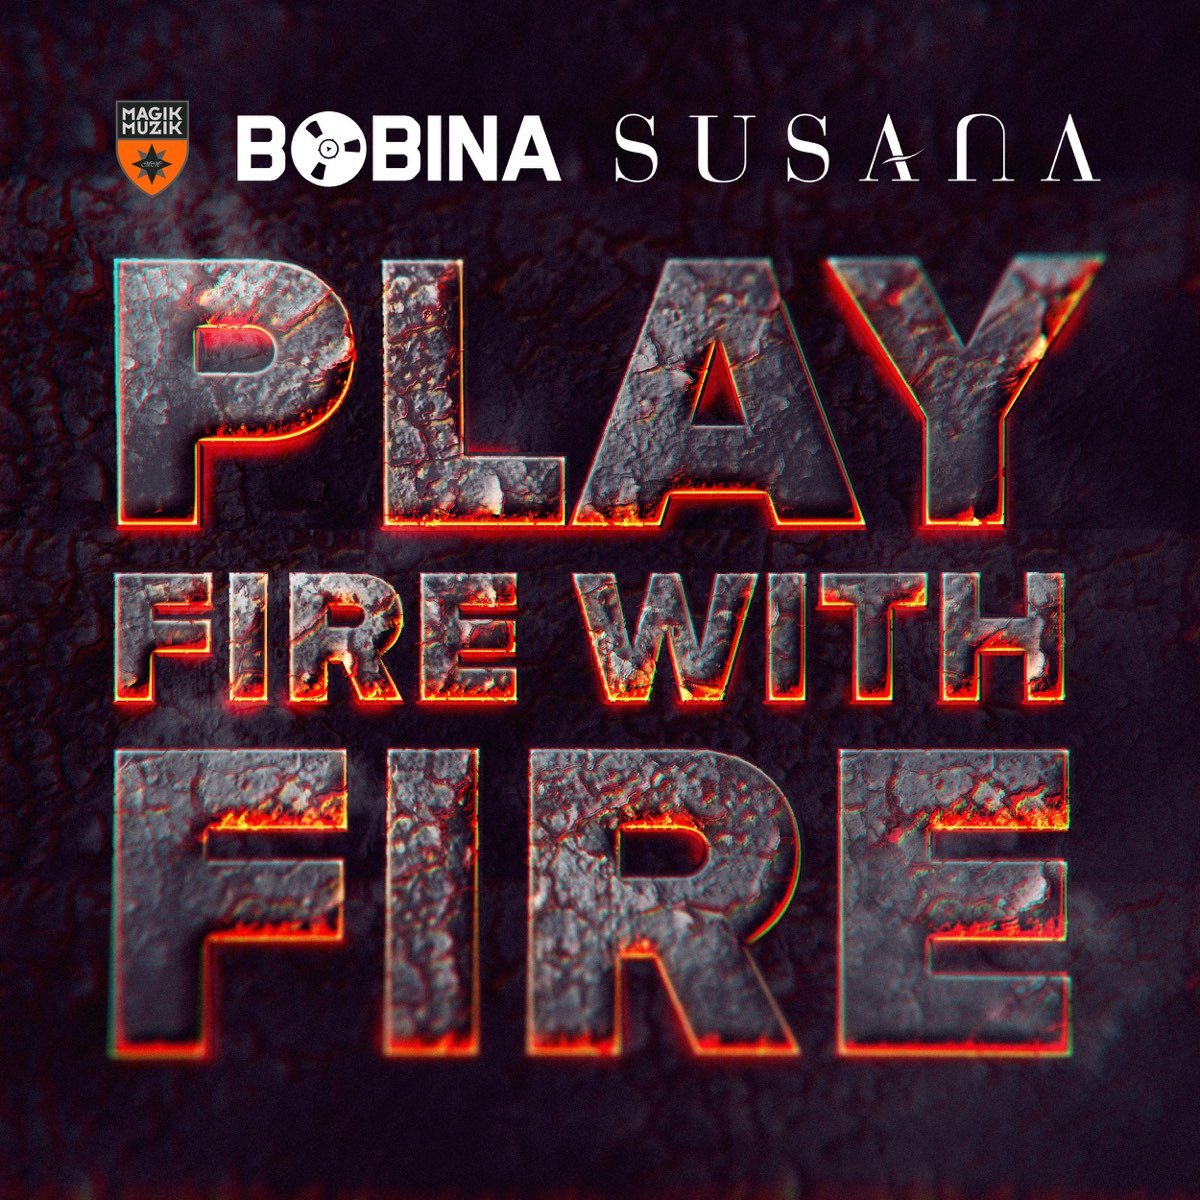 Playing with fire на русском. With Fire. Fire with Fire. Песня Play with Fire. Fire Play картинки.